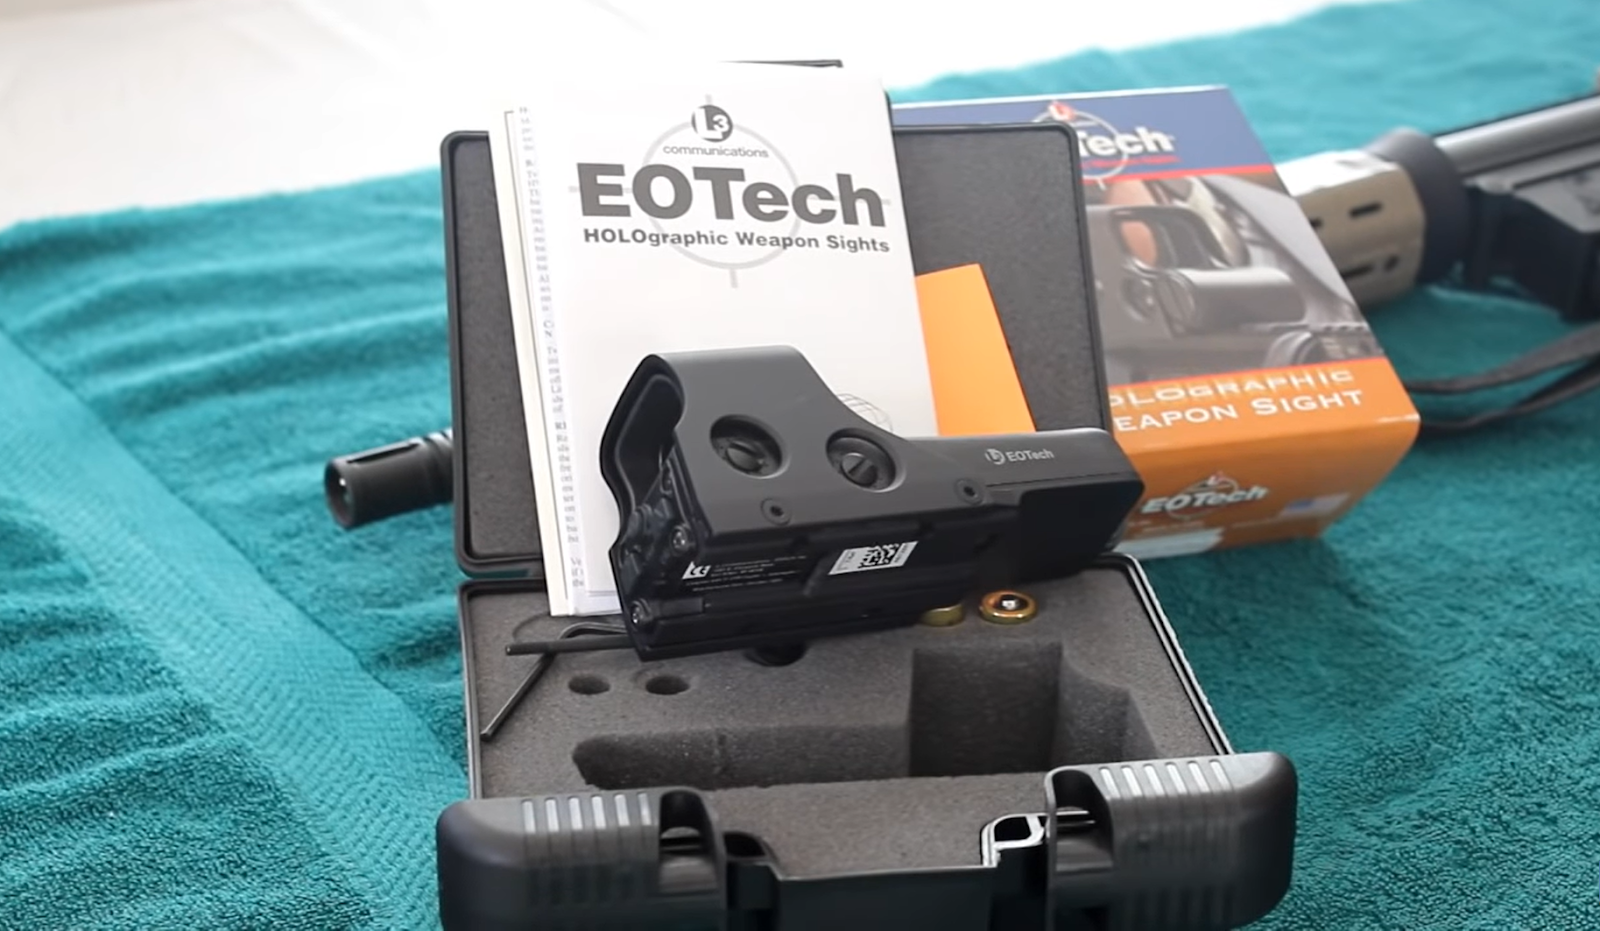 EOTech 552 and box on green towel